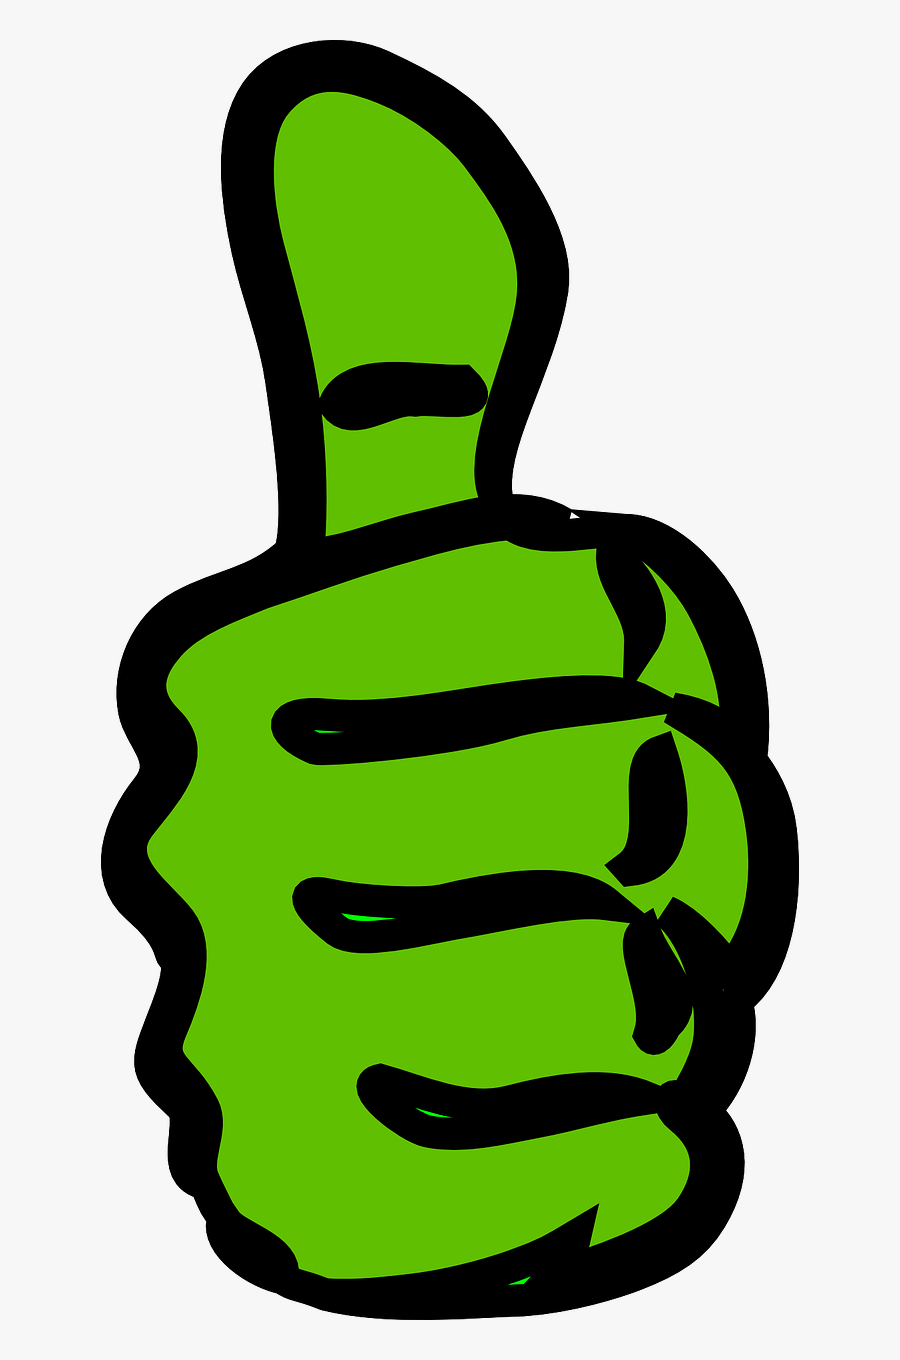 Thumb Up Clipart - Thumbs Up Clipart, Transparent Clipart